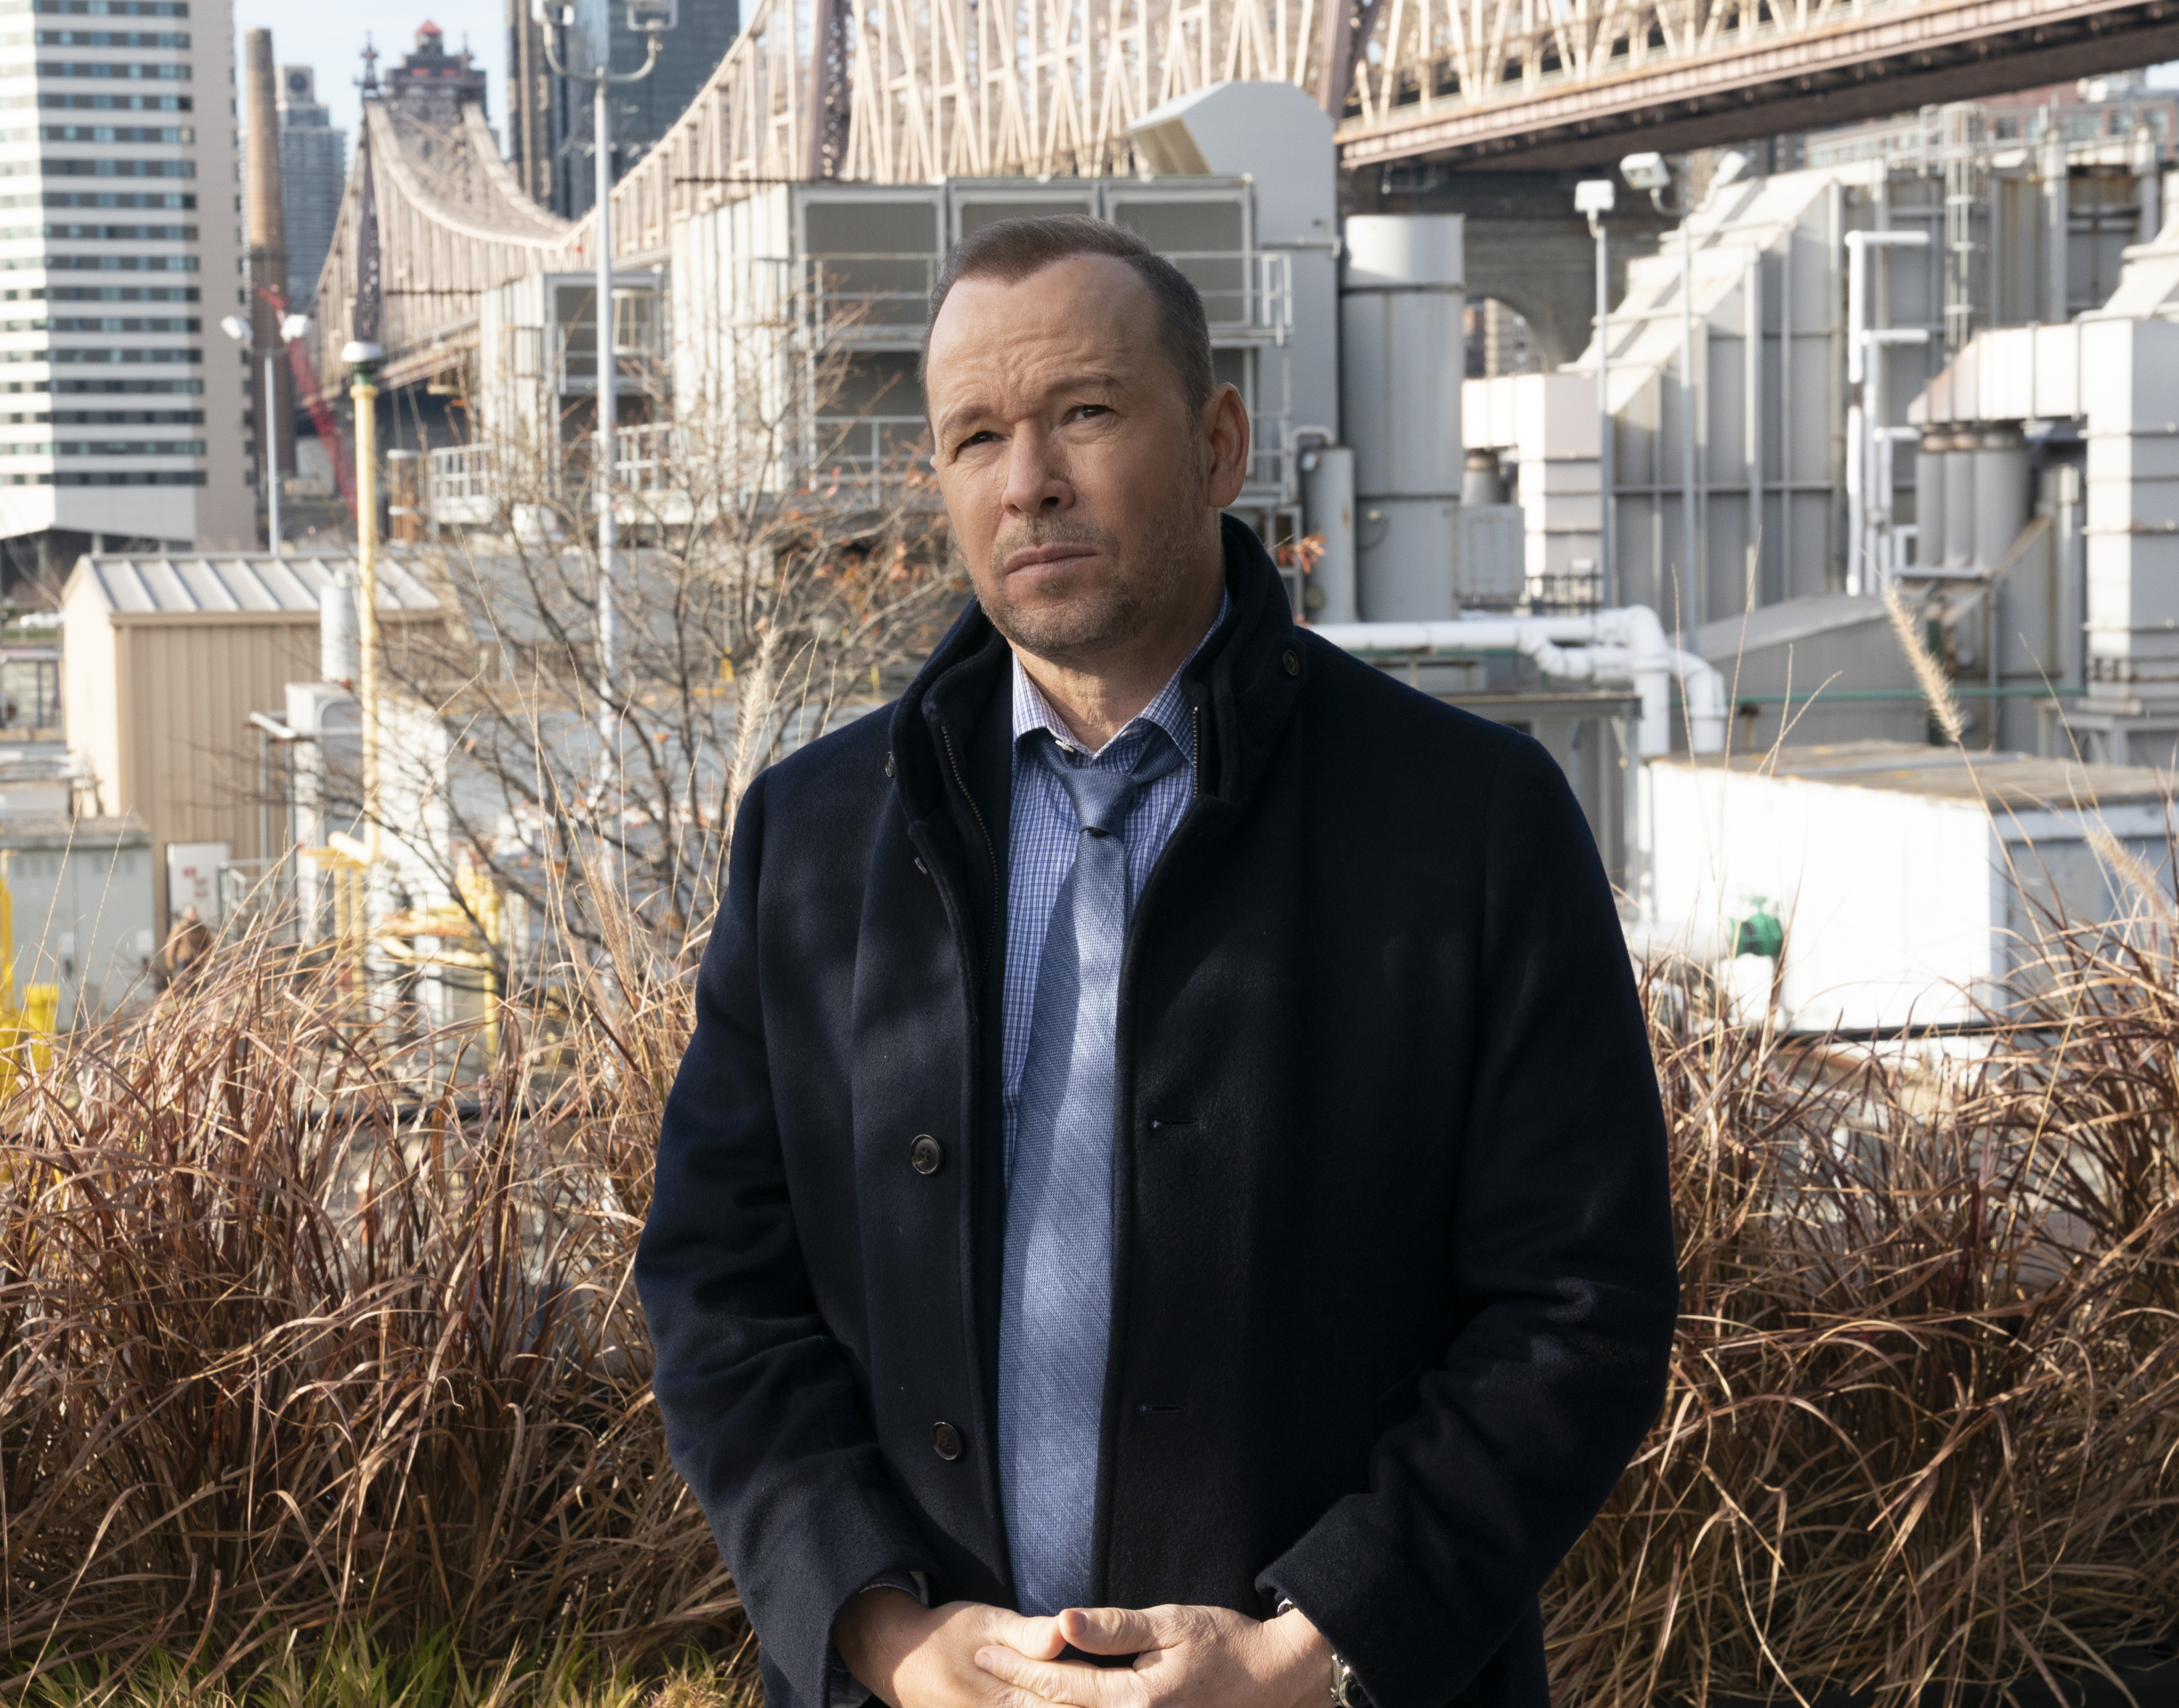 Donnie Wahlberg on Blue Bloods |
Patrick Harbron/CBS via Getty Images